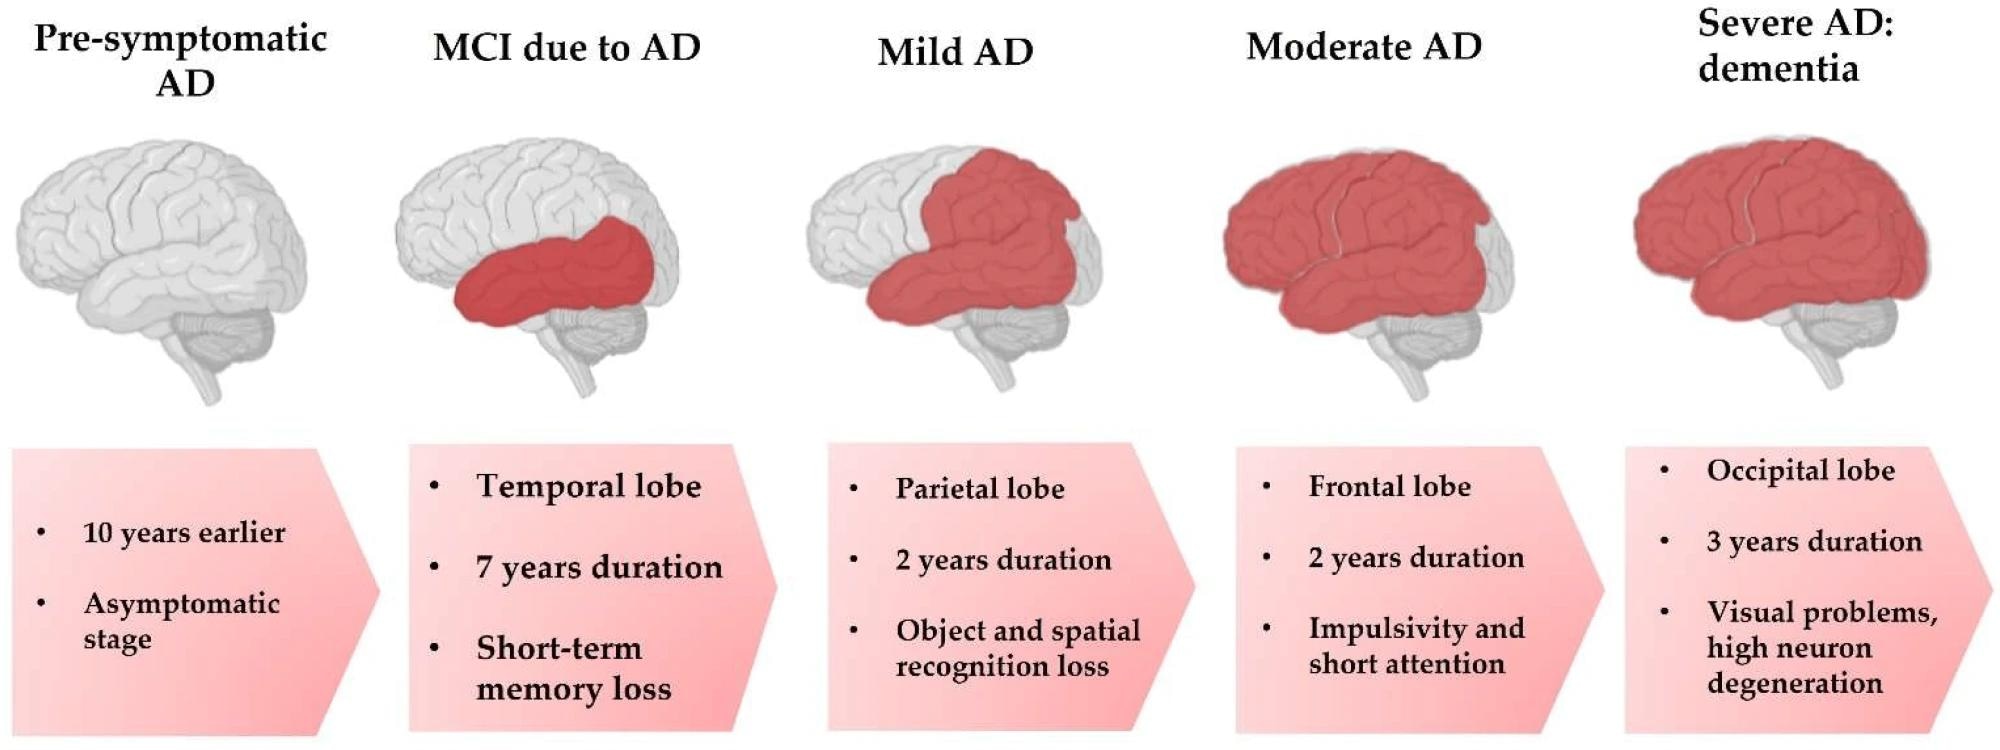 Progressive stages in the development of AD